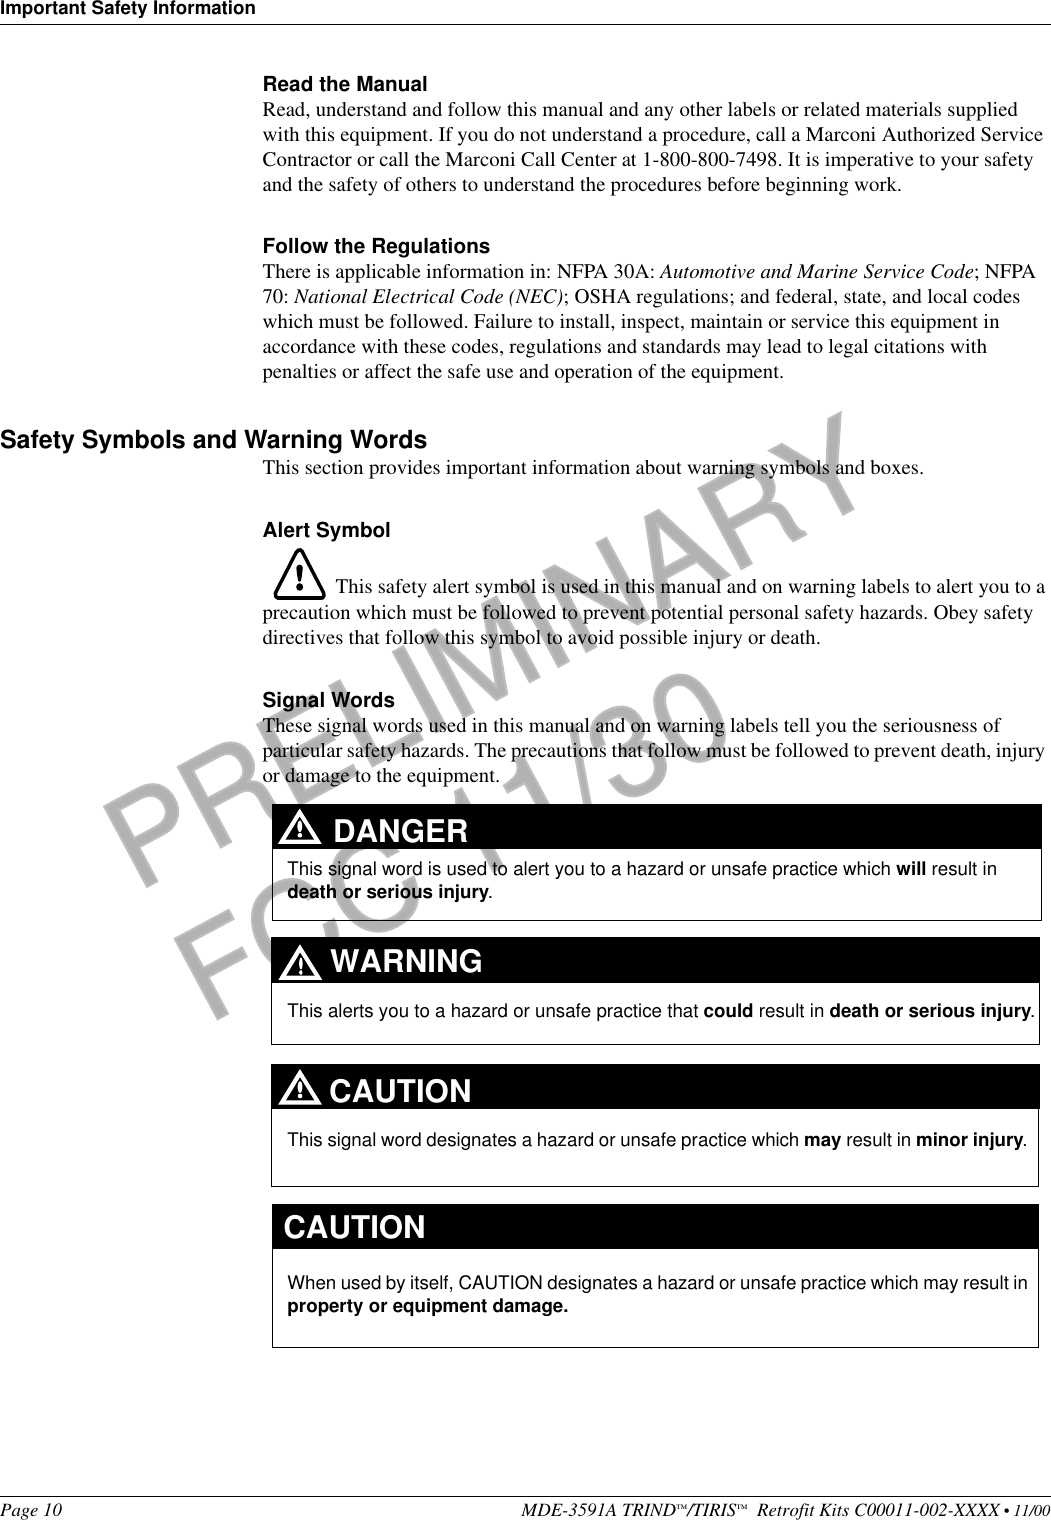 Important Safety InformationPage 10 MDE-3591A TRIND™/TIRIS™  Retrofit Kits C00011-002-XXXX • 11/00PRELIMINARYFCC 11/30Read the ManualRead, understand and follow this manual and any other labels or related materials supplied with this equipment. If you do not understand a procedure, call a Marconi Authorized Service Contractor or call the Marconi Call Center at 1-800-800-7498. It is imperative to your safety and the safety of others to understand the procedures before beginning work.Follow the RegulationsThere is applicable information in: NFPA 30A: Automotive and Marine Service Code; NFPA 70: National Electrical Code (NEC); OSHA regulations; and federal, state, and local codes which must be followed. Failure to install, inspect, maintain or service this equipment in accordance with these codes, regulations and standards may lead to legal citations with penalties or affect the safe use and operation of the equipment.Safety Symbols and Warning WordsThis section provides important information about warning symbols and boxes.Alert Symbol This safety alert symbol is used in this manual and on warning labels to alert you to a precaution which must be followed to prevent potential personal safety hazards. Obey safety directives that follow this symbol to avoid possible injury or death.Signal WordsThese signal words used in this manual and on warning labels tell you the seriousness of particular safety hazards. The precautions that follow must be followed to prevent death, injury or damage to the equipment. This signal word designates a hazard or unsafe practice which may result in minor injury.This signal word is used to alert you to a hazard or unsafe practice which will result in death or serious injury.This alerts you to a hazard or unsafe practice that could result in death or serious injury.CAUTIONWhen used by itself, CAUTION designates a hazard or unsafe practice which may result in property or equipment damage.CAUTIONDANGERWARNING